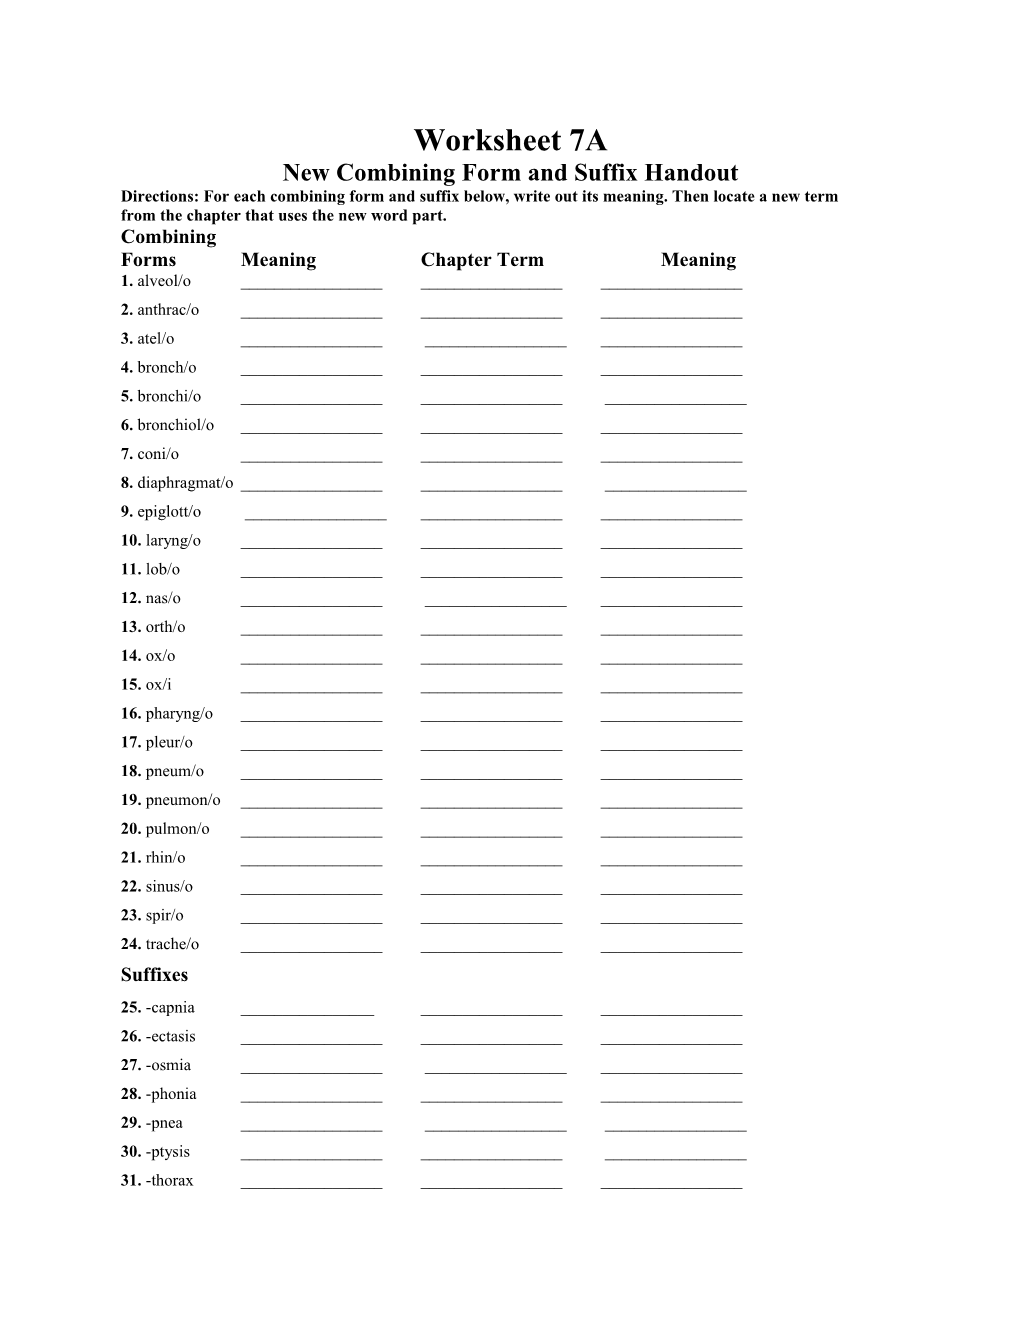 New Combining Form and Suffix Handout